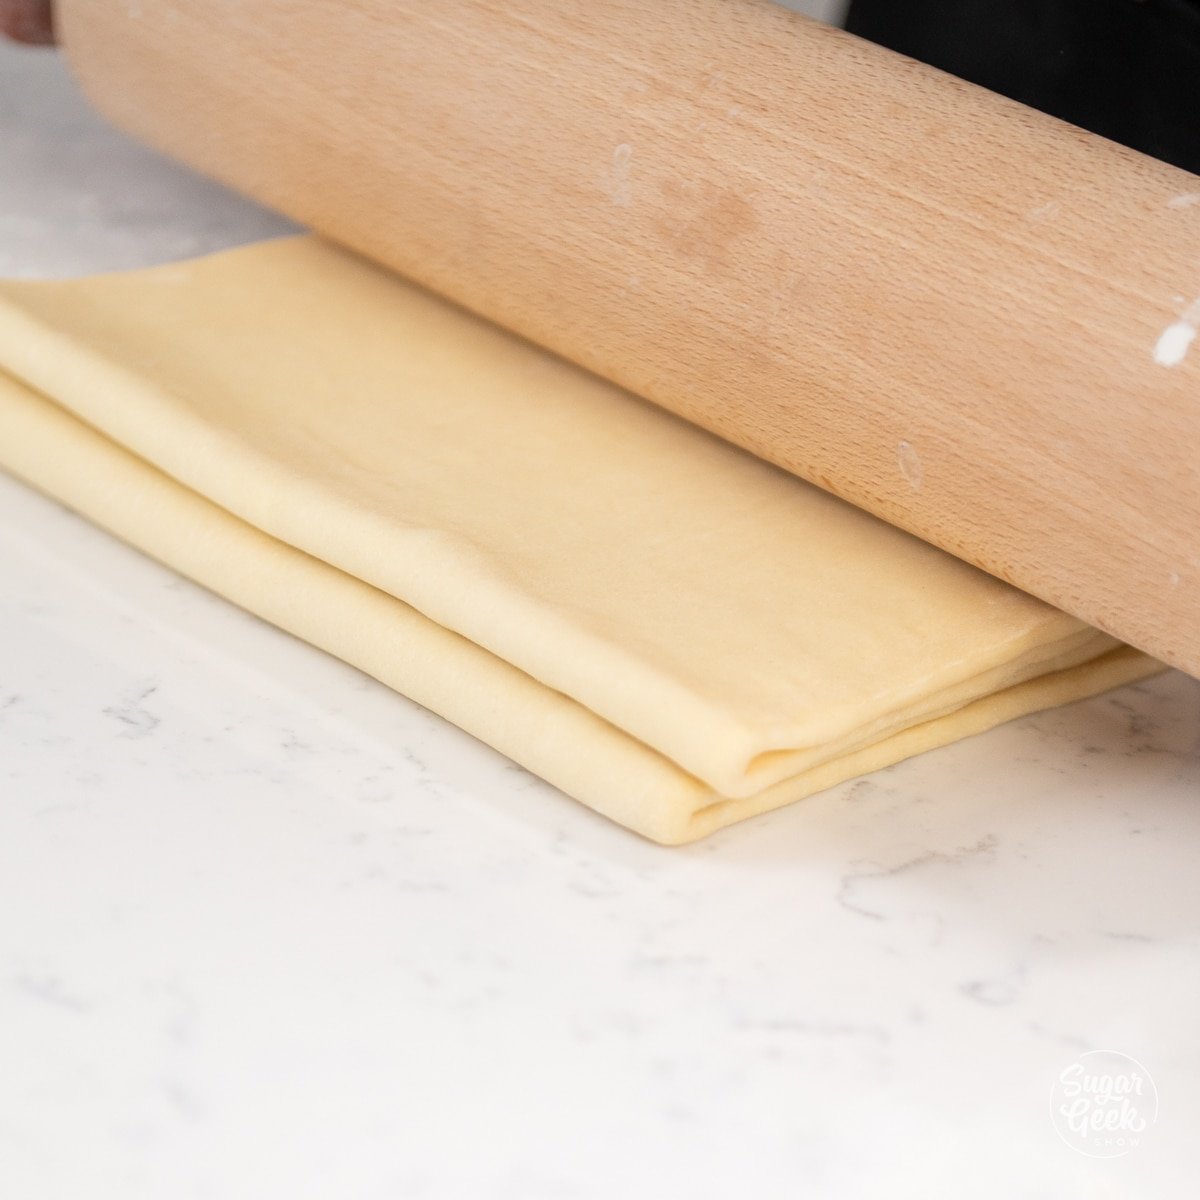 croissant dough folded in half with a wooden rolling pin on top